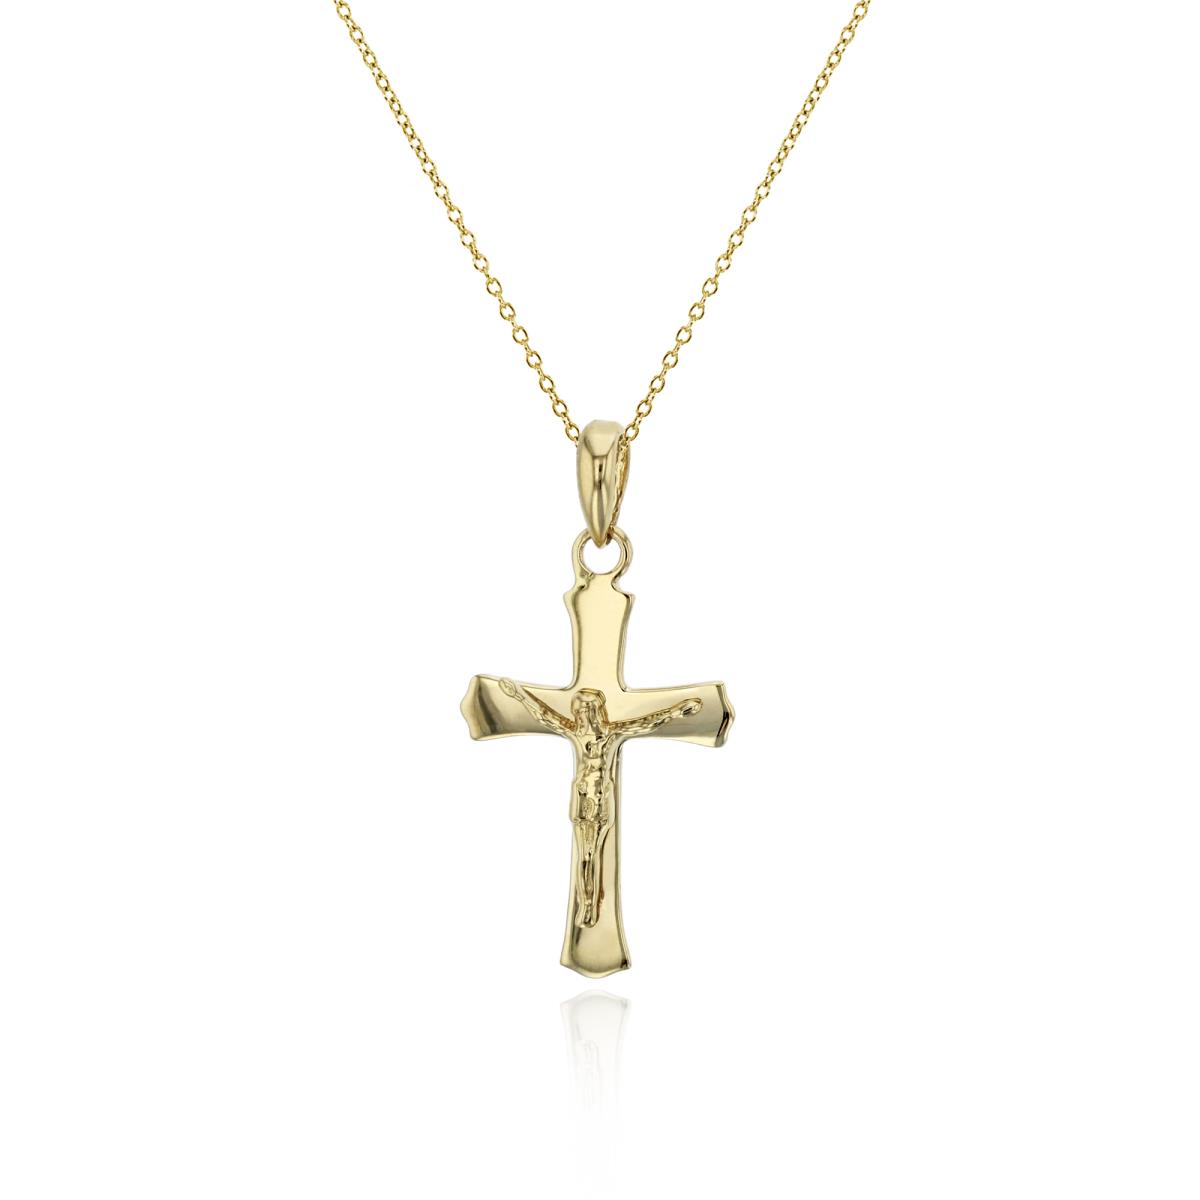 14K Yellow Gold 25x12mm Polished Crucifix Cross 18" Necklace